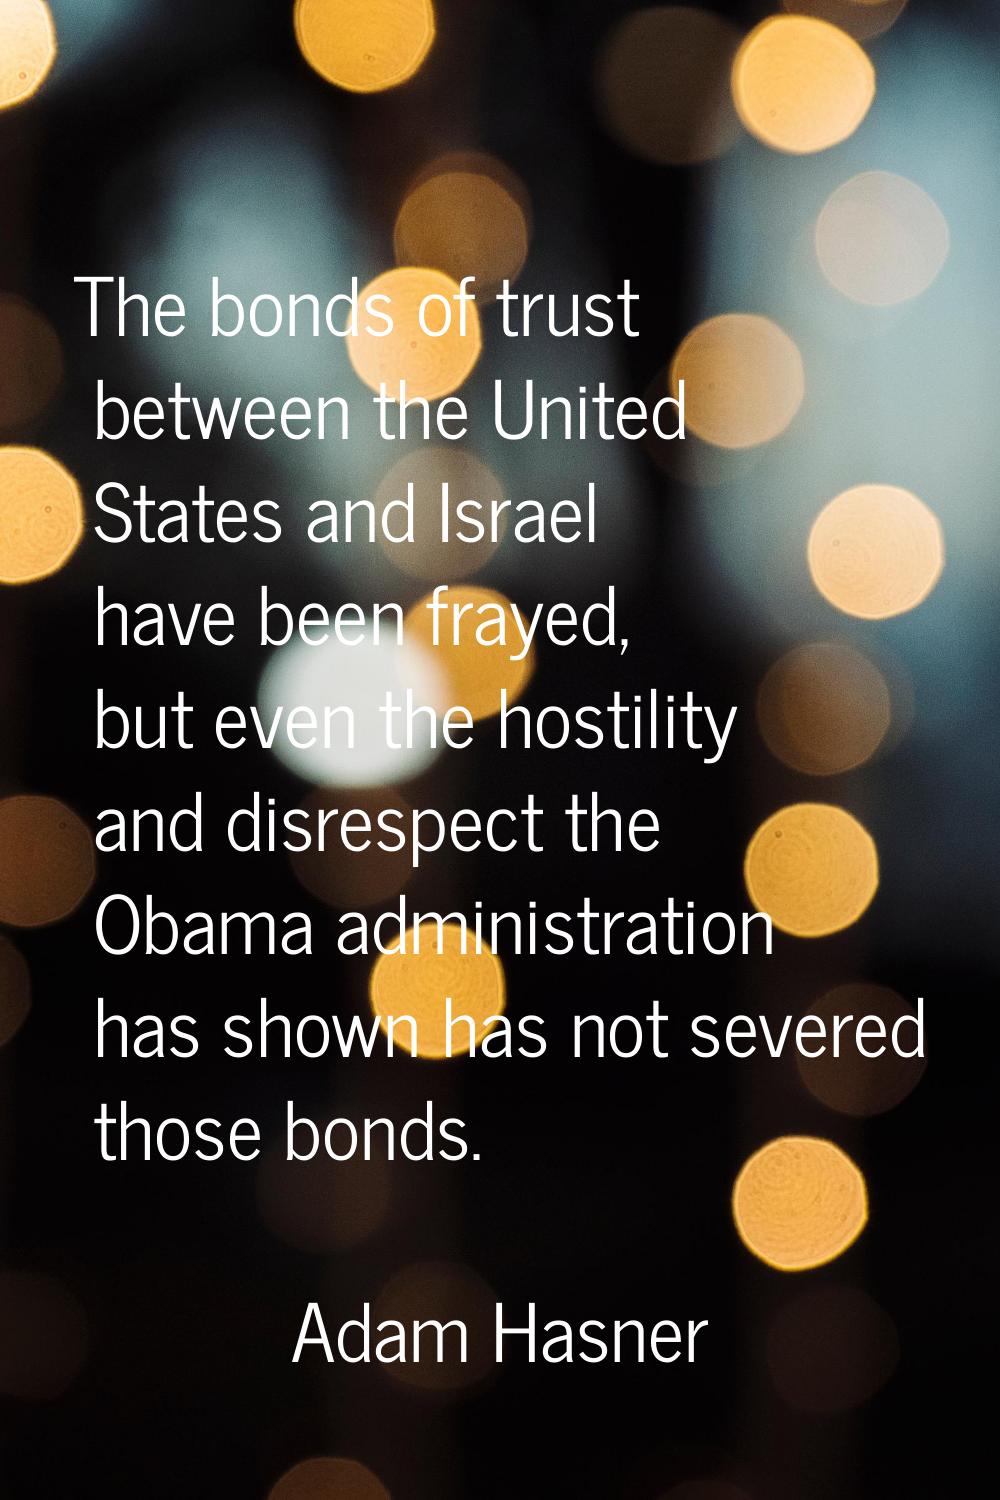 The bonds of trust between the United States and Israel have been frayed, but even the hostility an